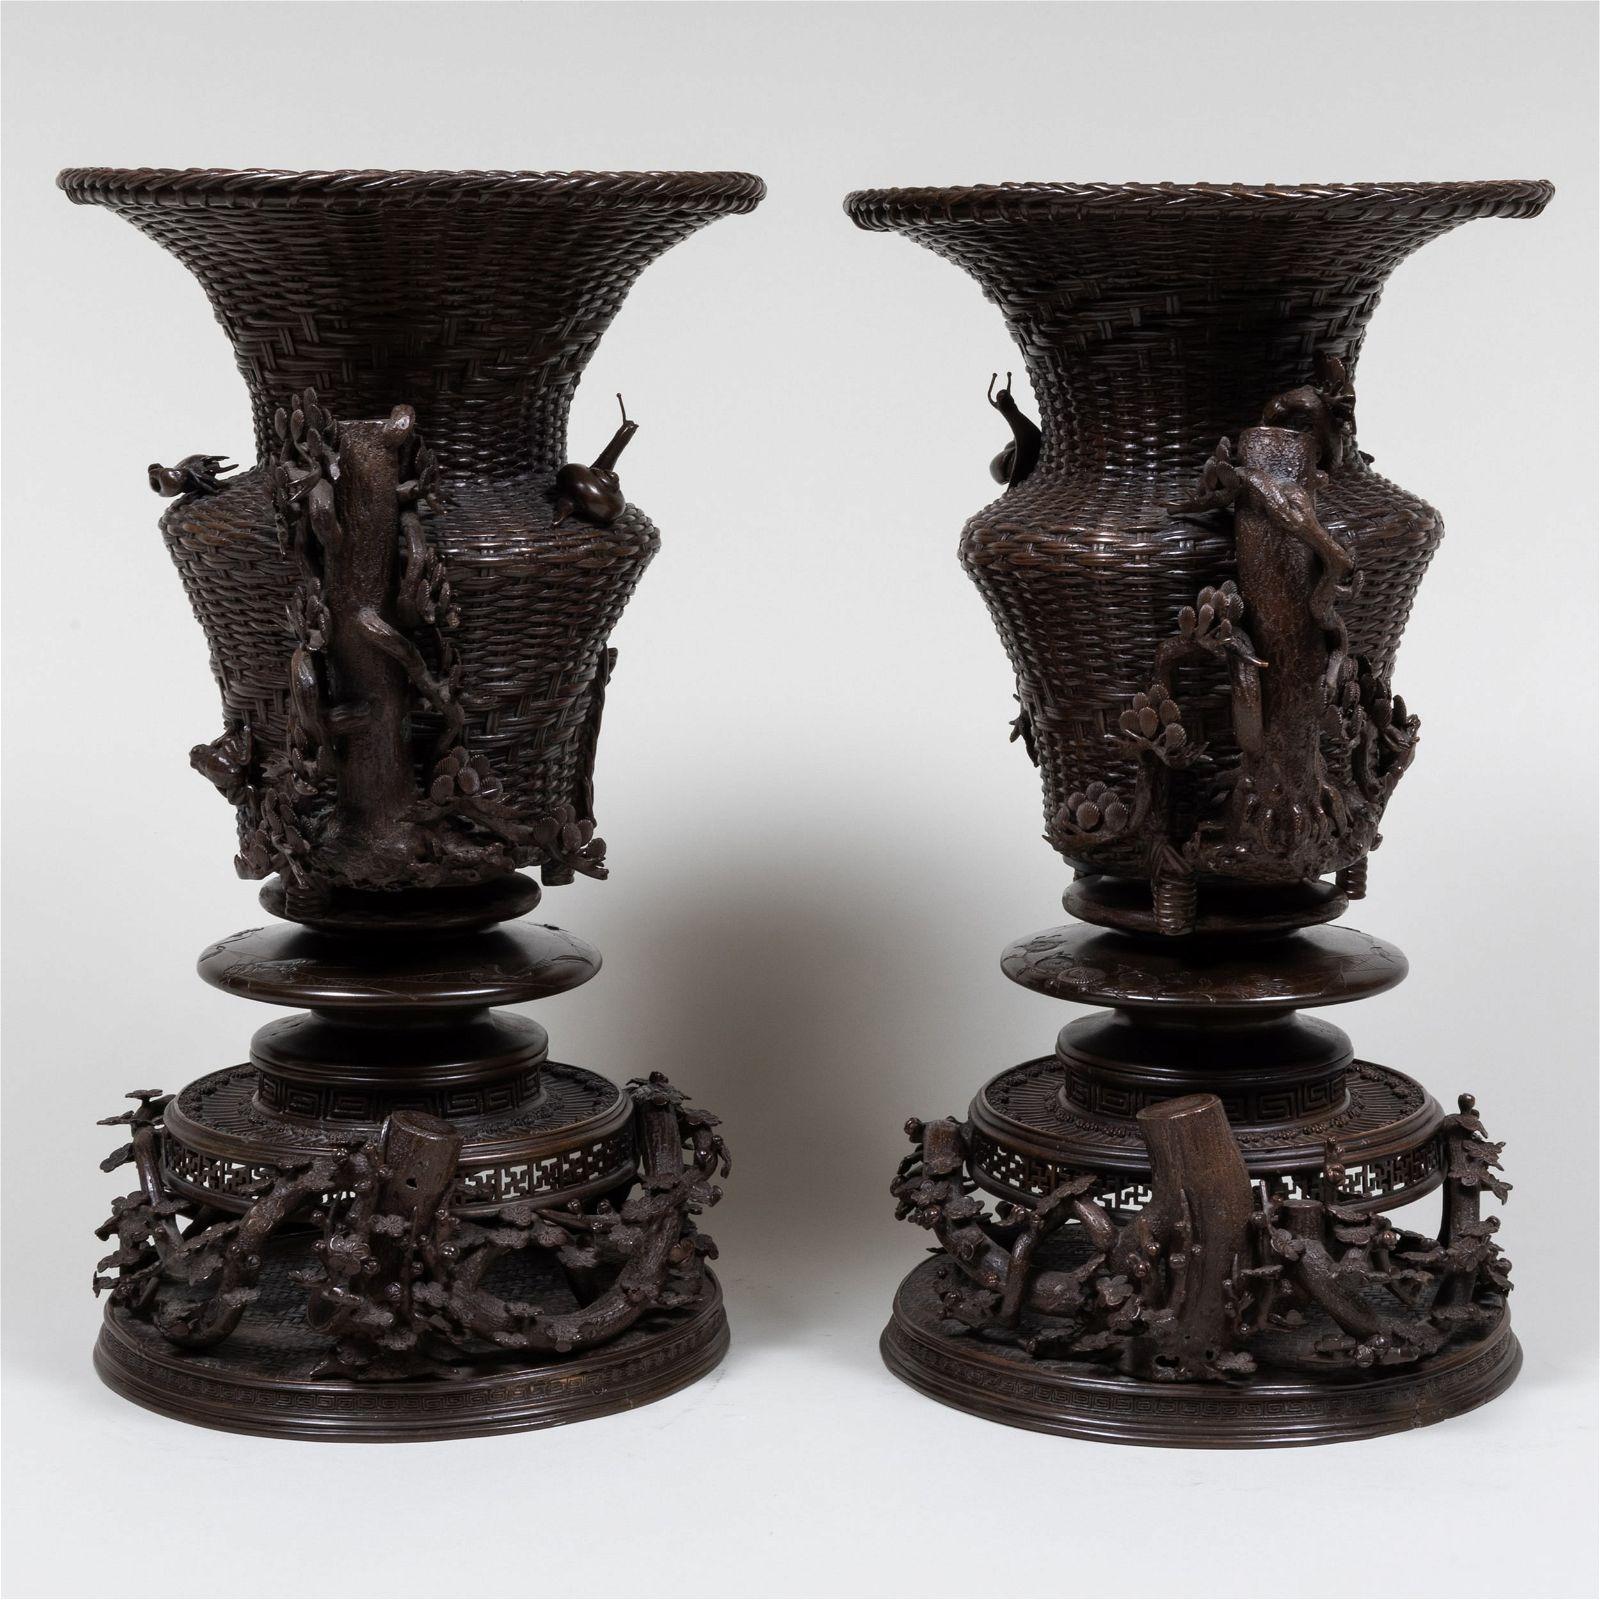 Pair of Finest quality  large, antique Meiji period bronze vases of woven basket form, with tree branch form handles and adorned with various motifs including insects, buds and flowers.  Each with two sections.  Apparently unsigned.
